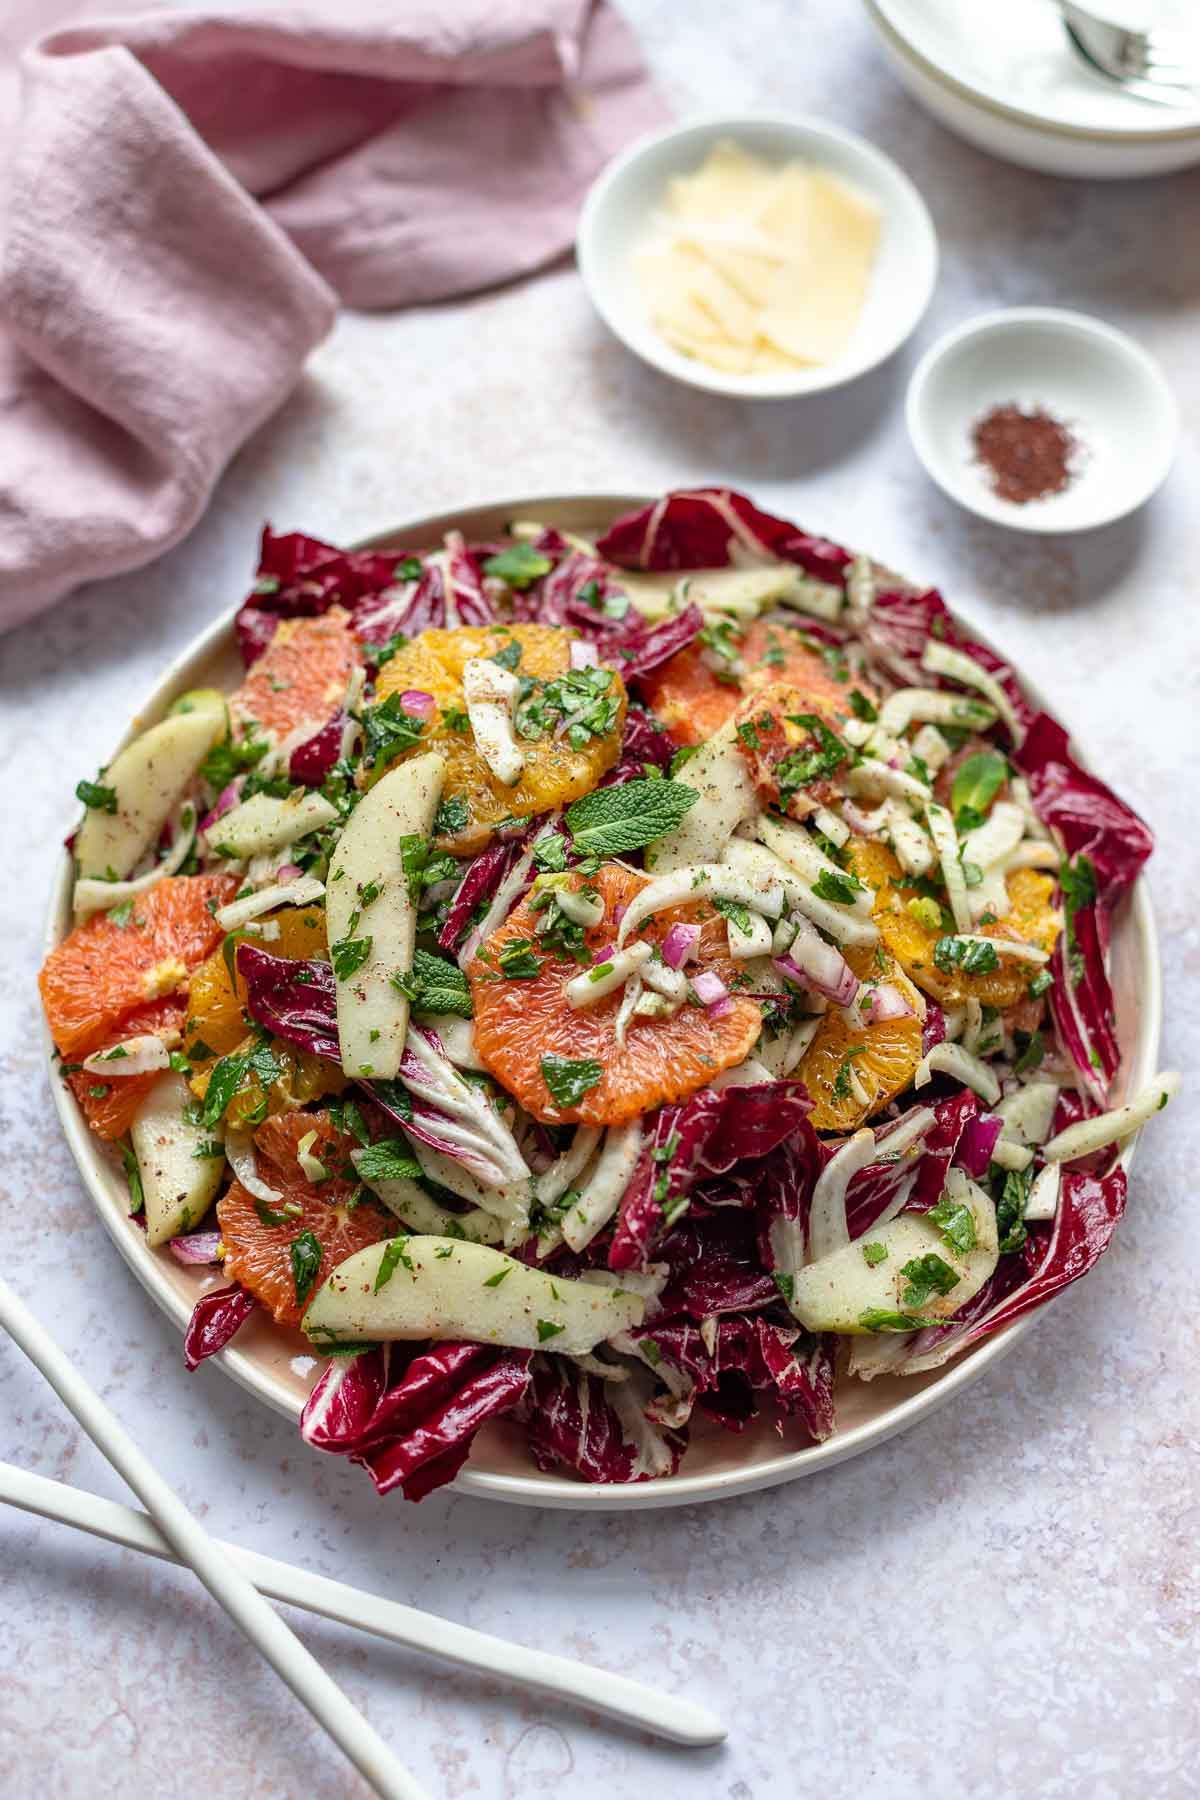 Radicchio and Fennel Salad with Citrus and Pear